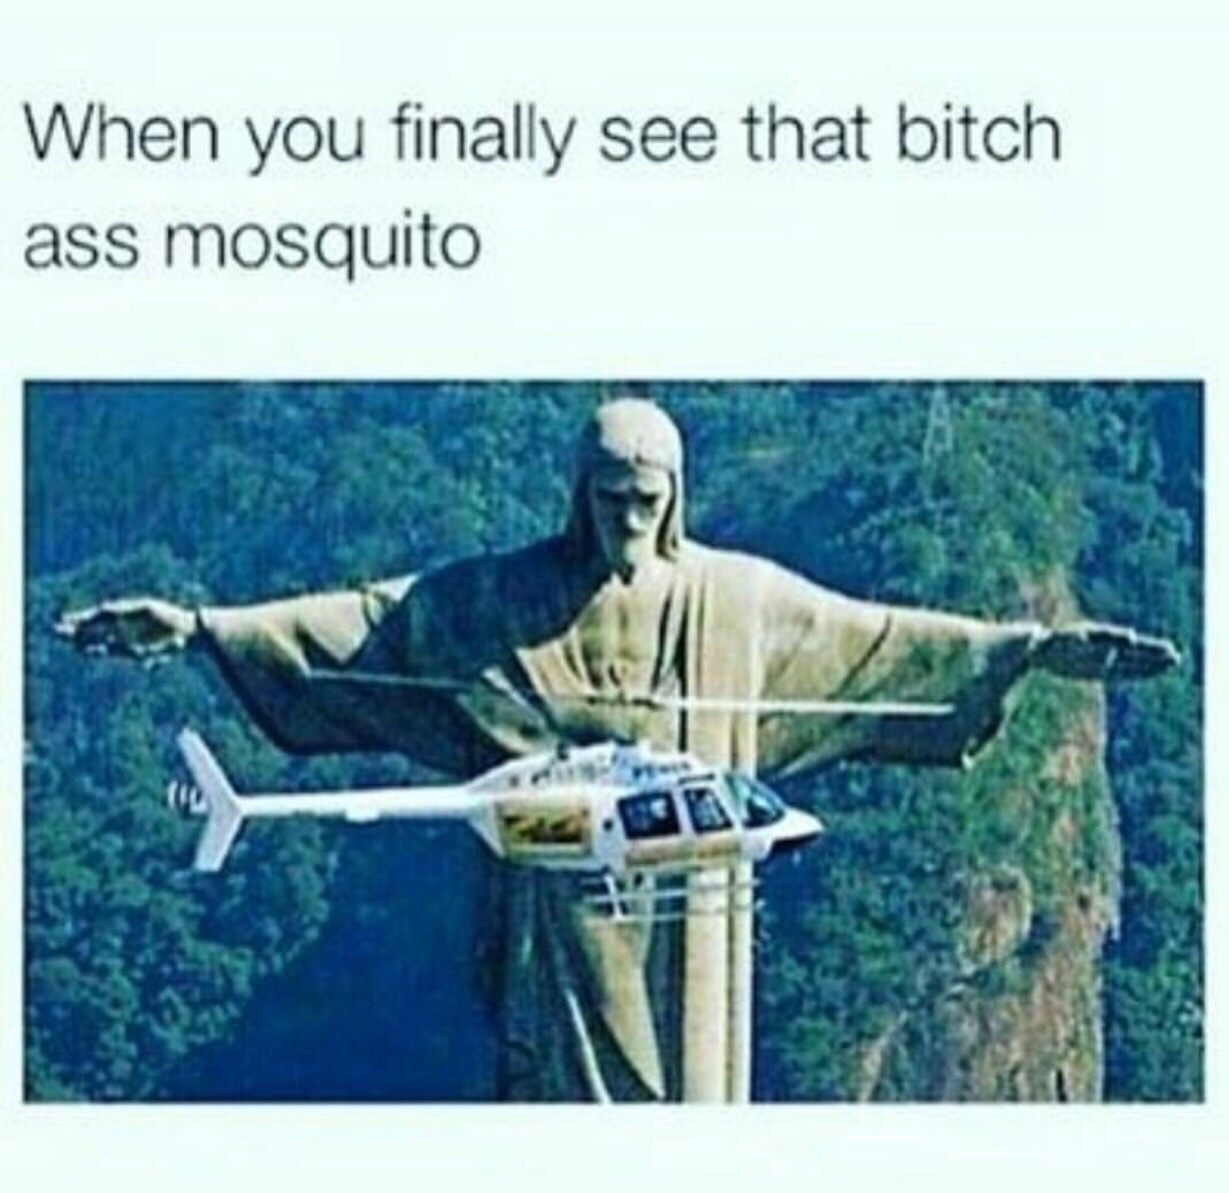 Mosquito Memes That Are Nothing to Swat At - Gallery | eBaum's World
